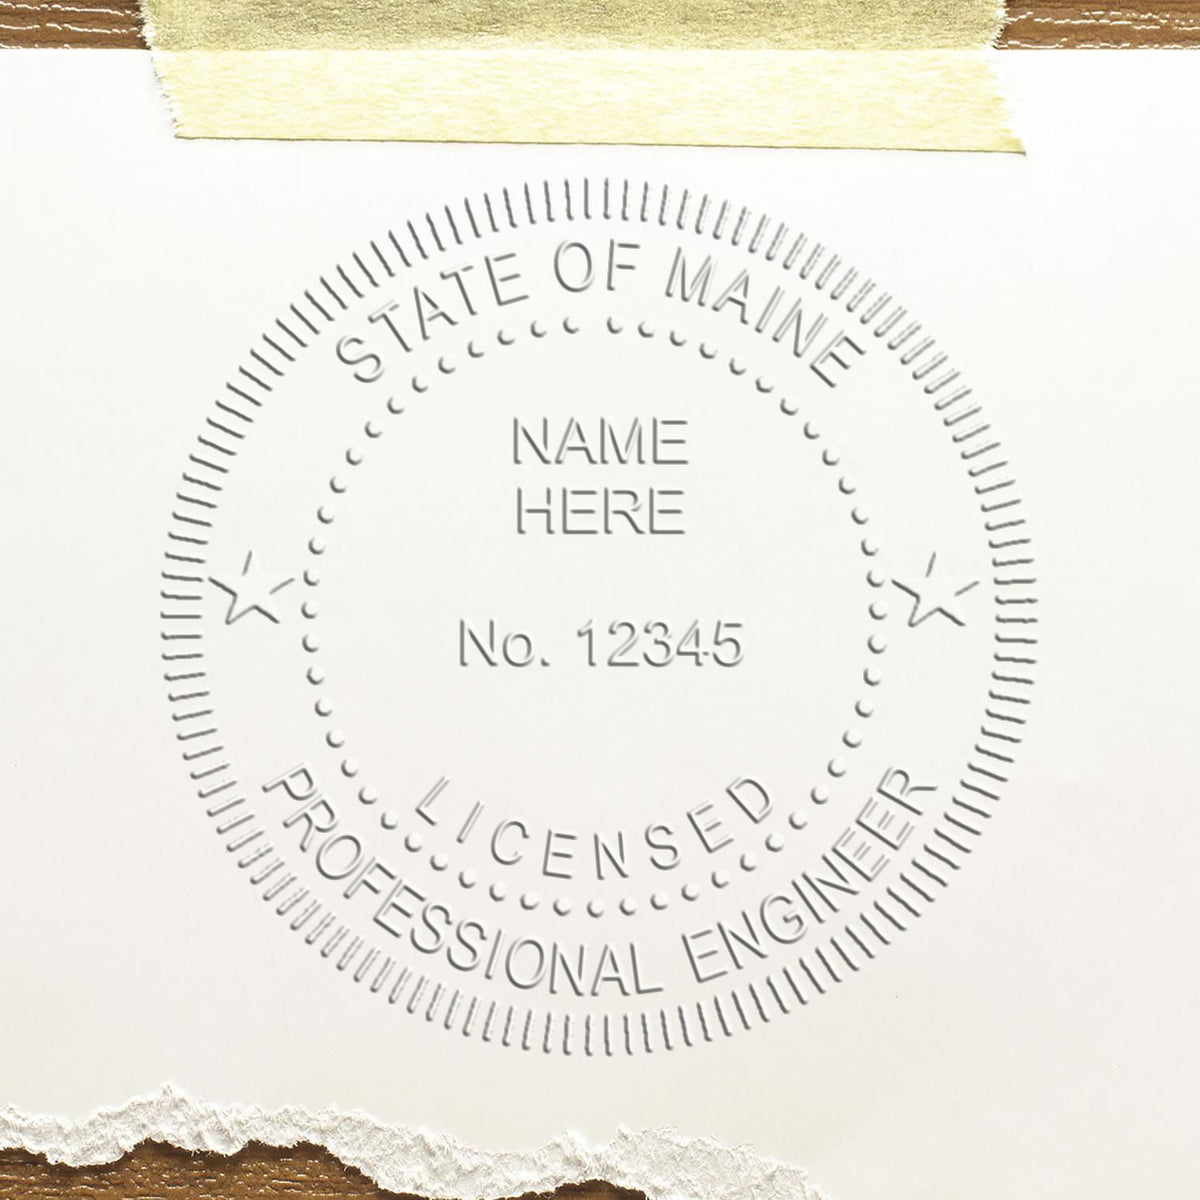 A lifestyle photo showing a stamped image of the Handheld Maine Professional Engineer Embosser on a piece of paper